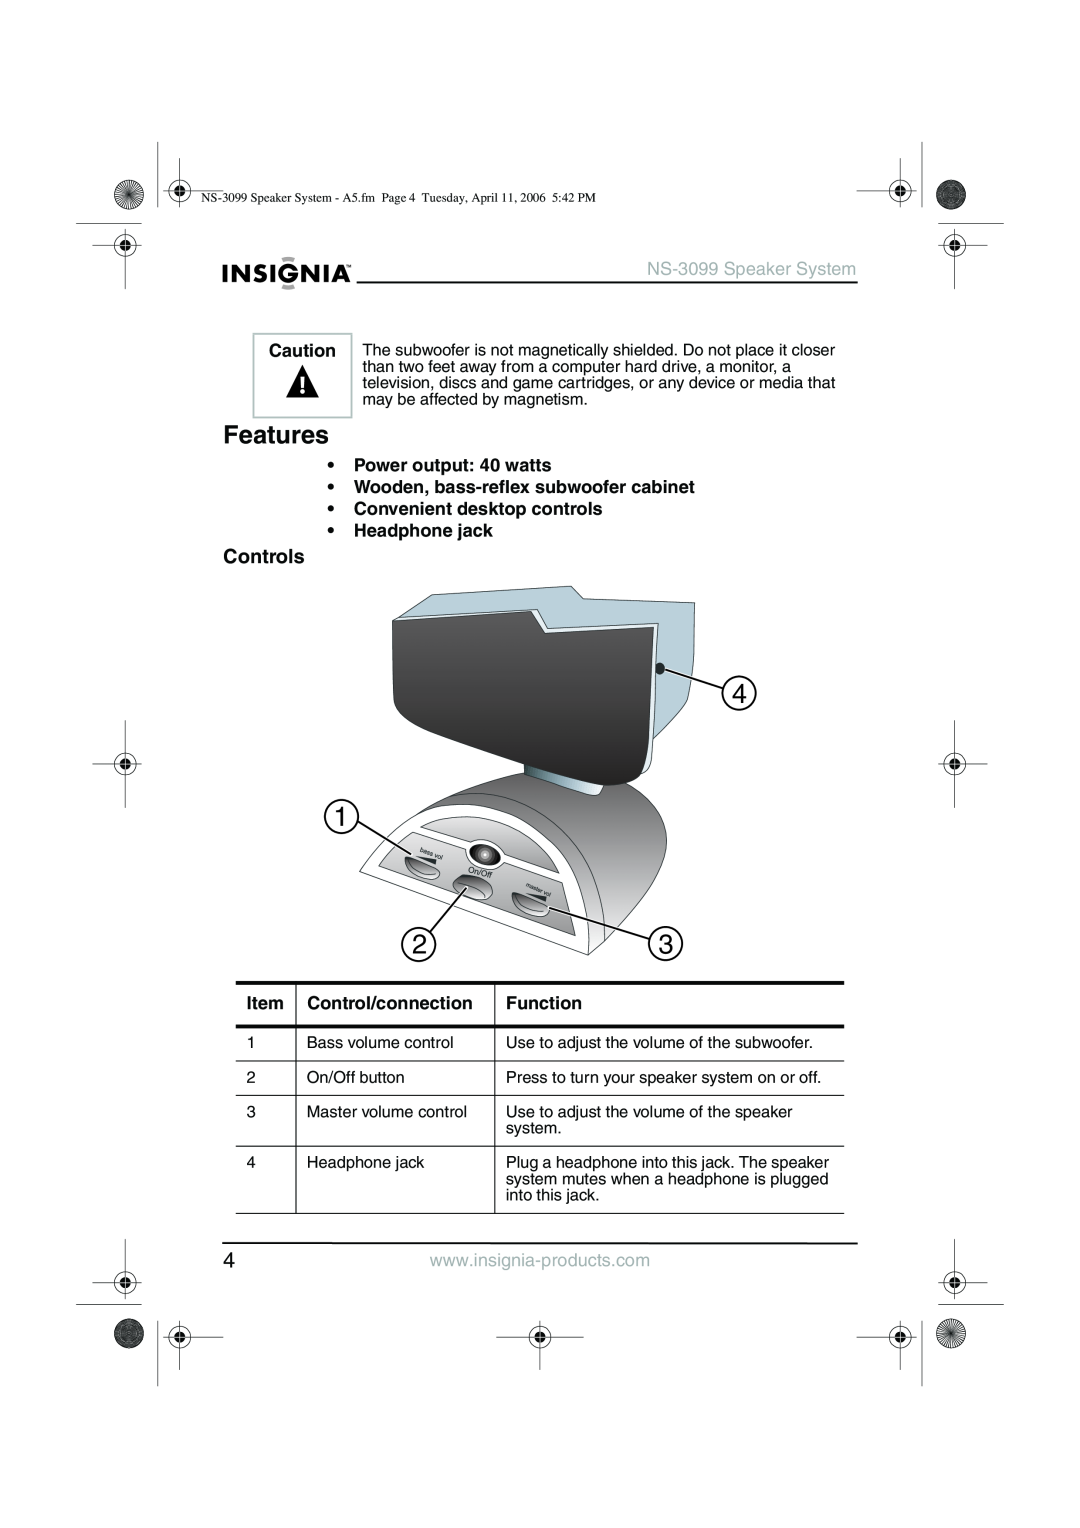 Insignia NS-3099 manual Features, Controls, Power output 40 watts, Wooden, bass-reflexsubwoofer cabinet, Control/connection 